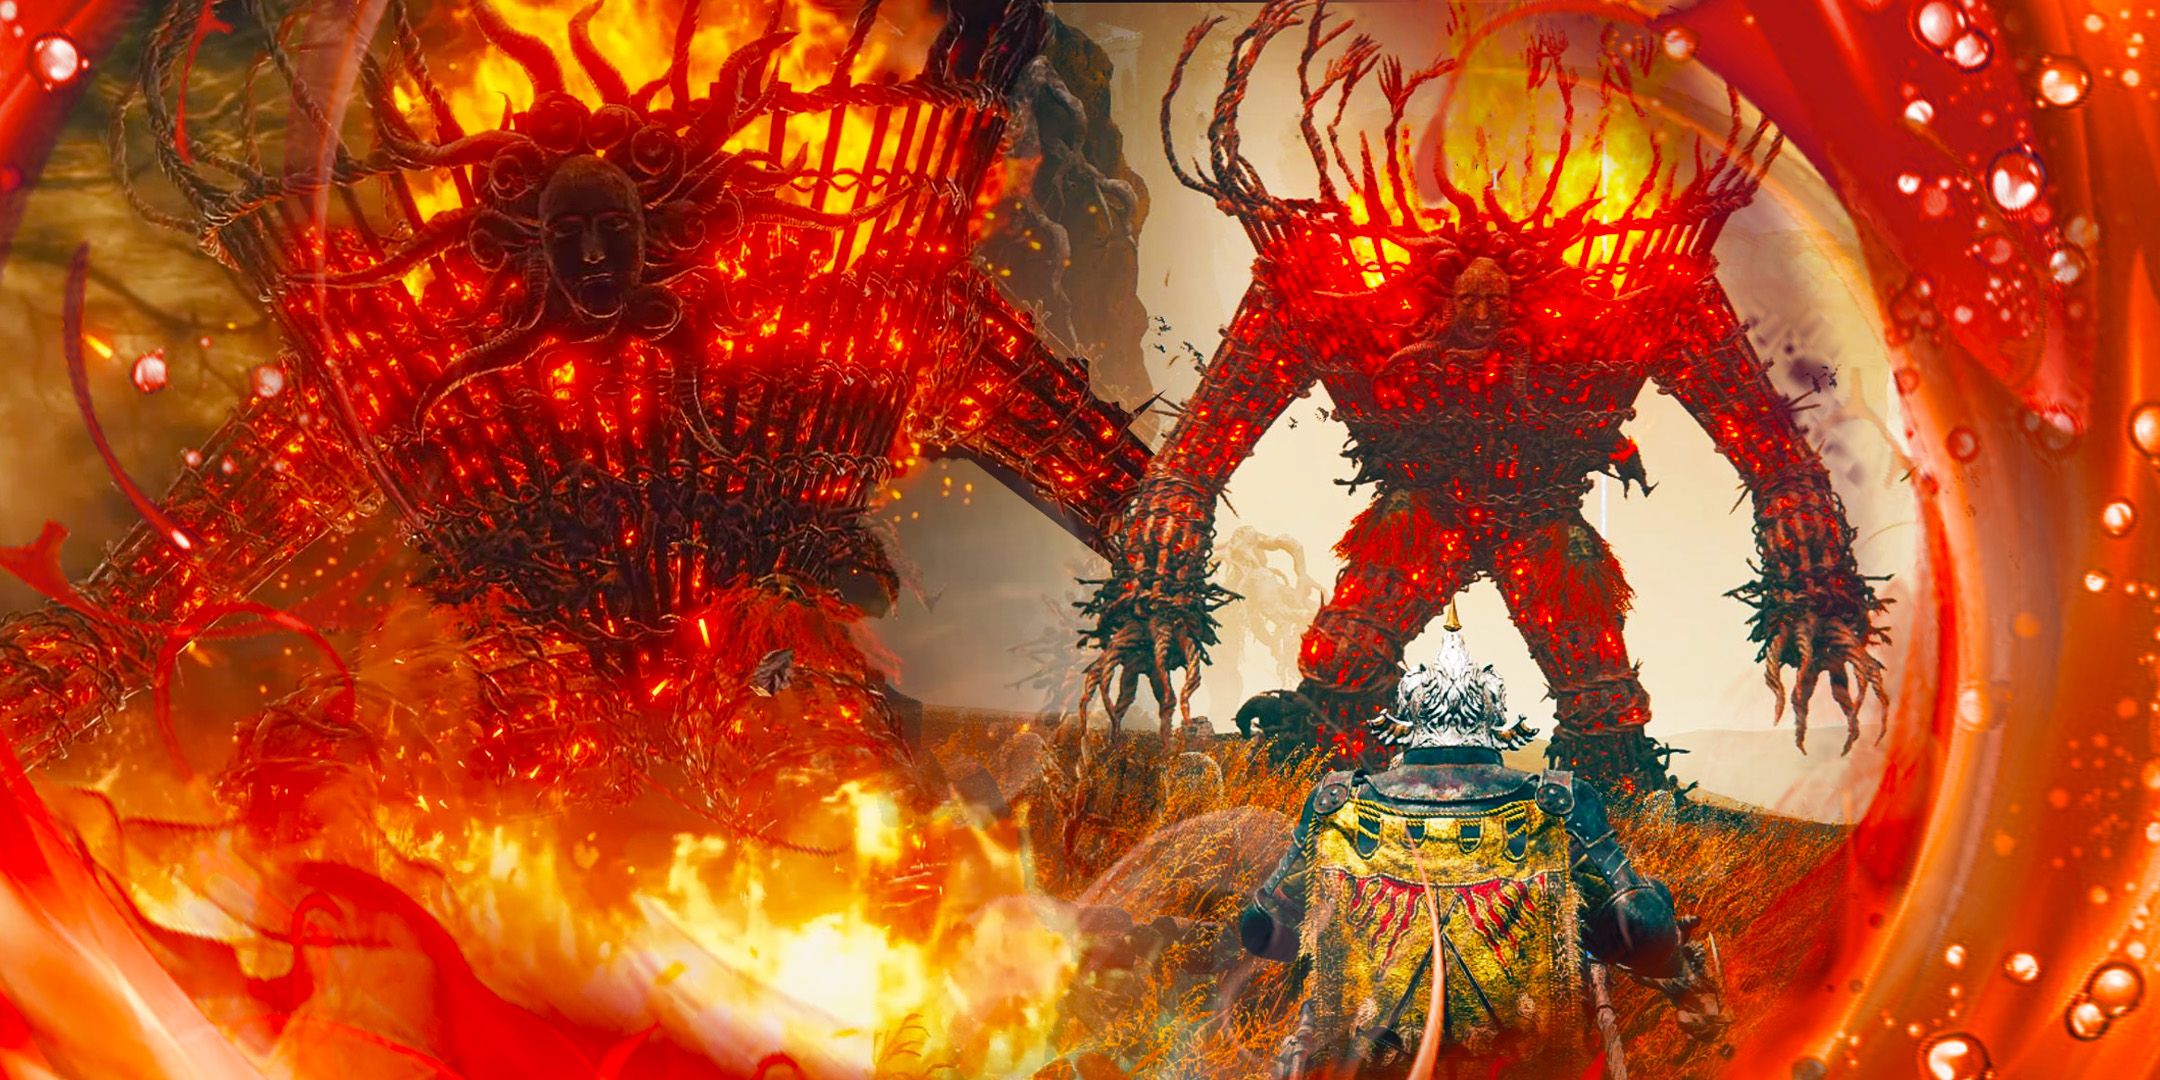 Elden Ring Shadow of the Erdtree character next to giant Furnace Golem world bosses in new DLC map